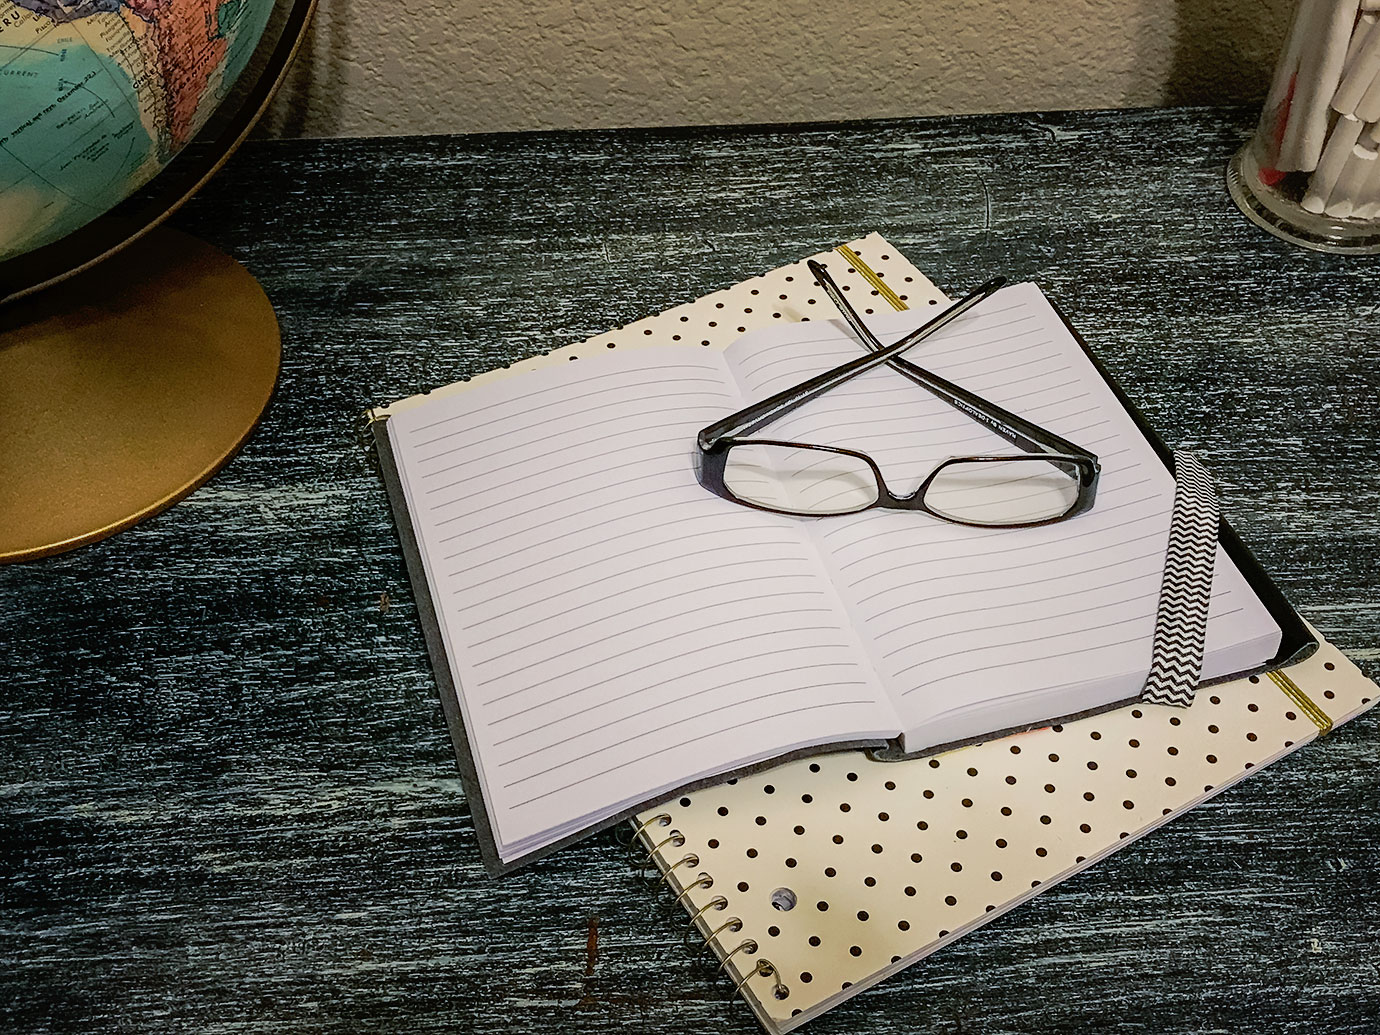 Polka Dot Note Book on a Black Desk with Glasses